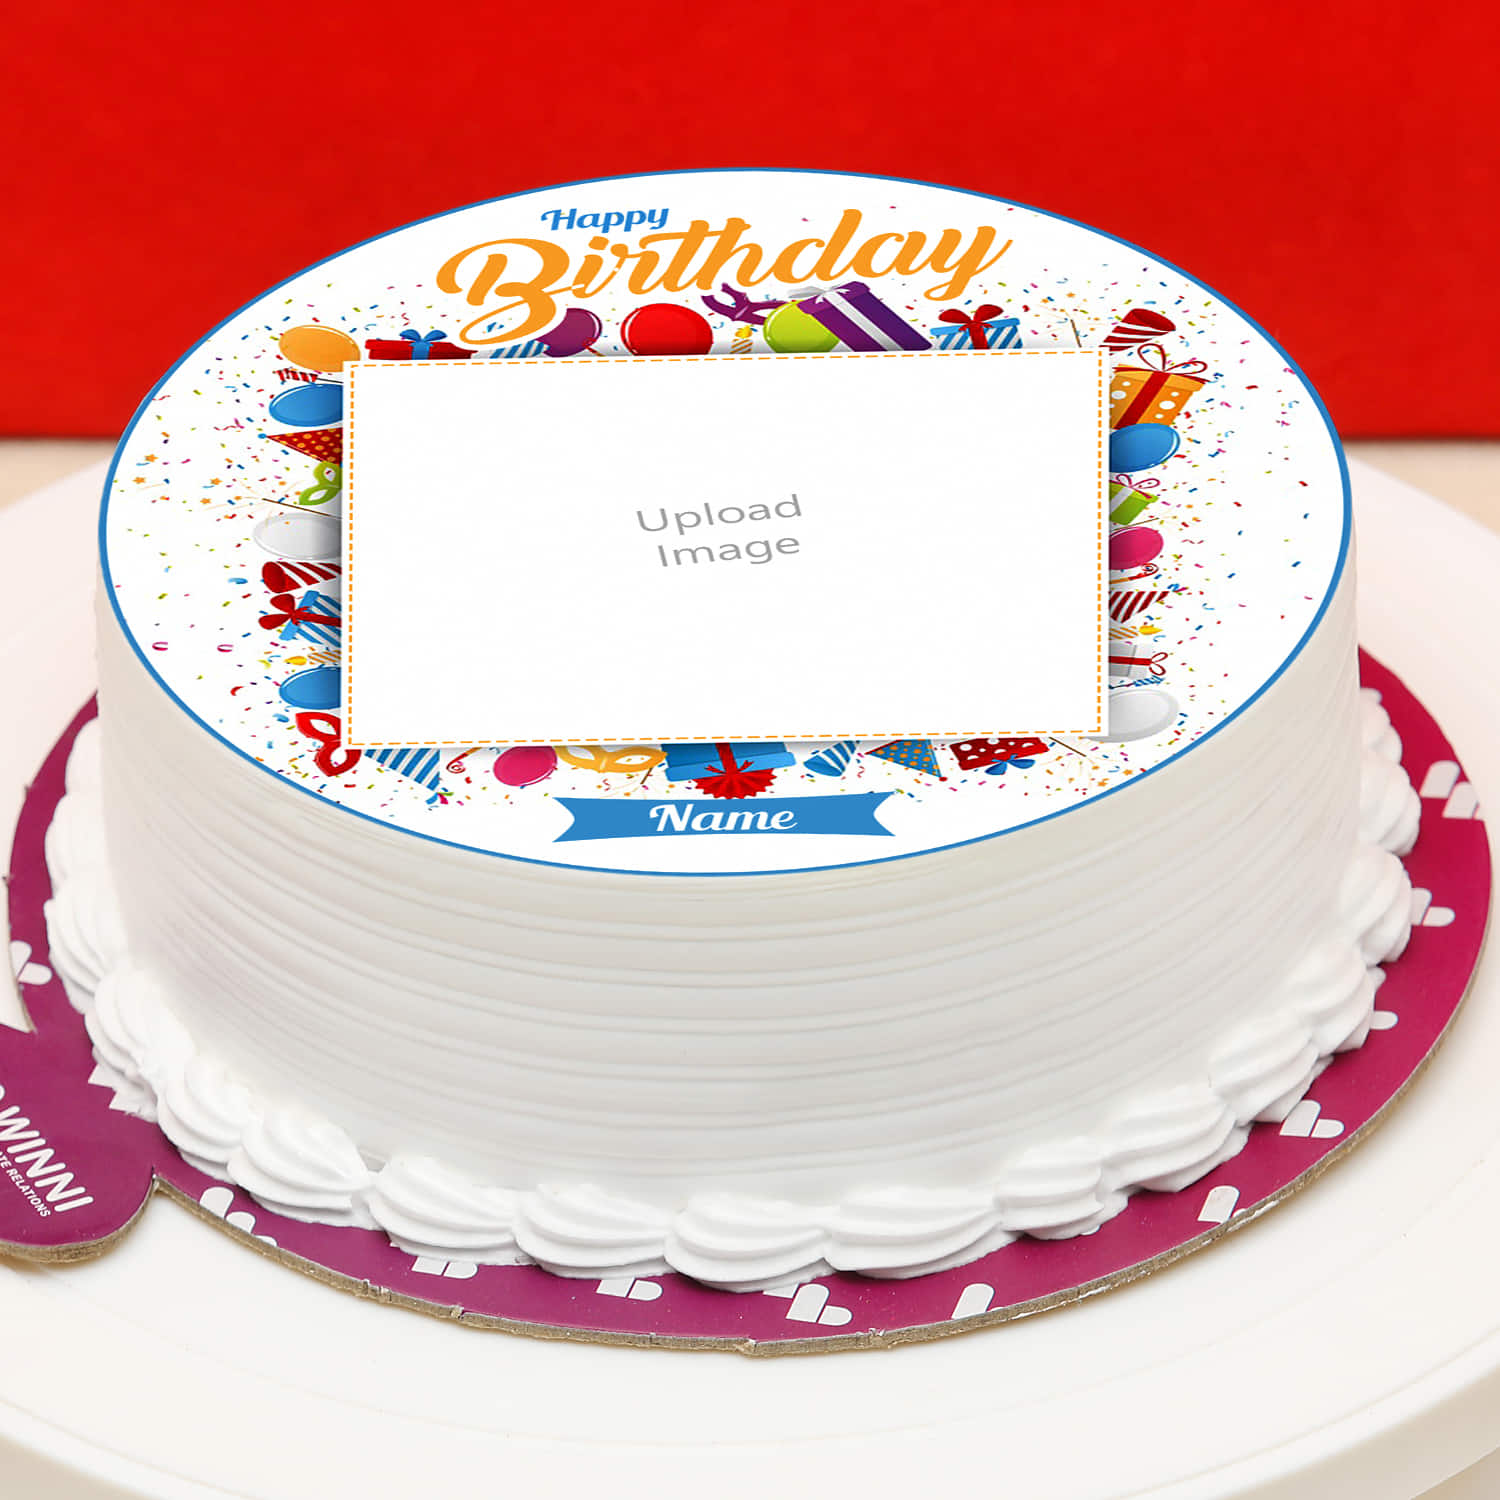 Happy Birthday Wishes Card with Name Edit